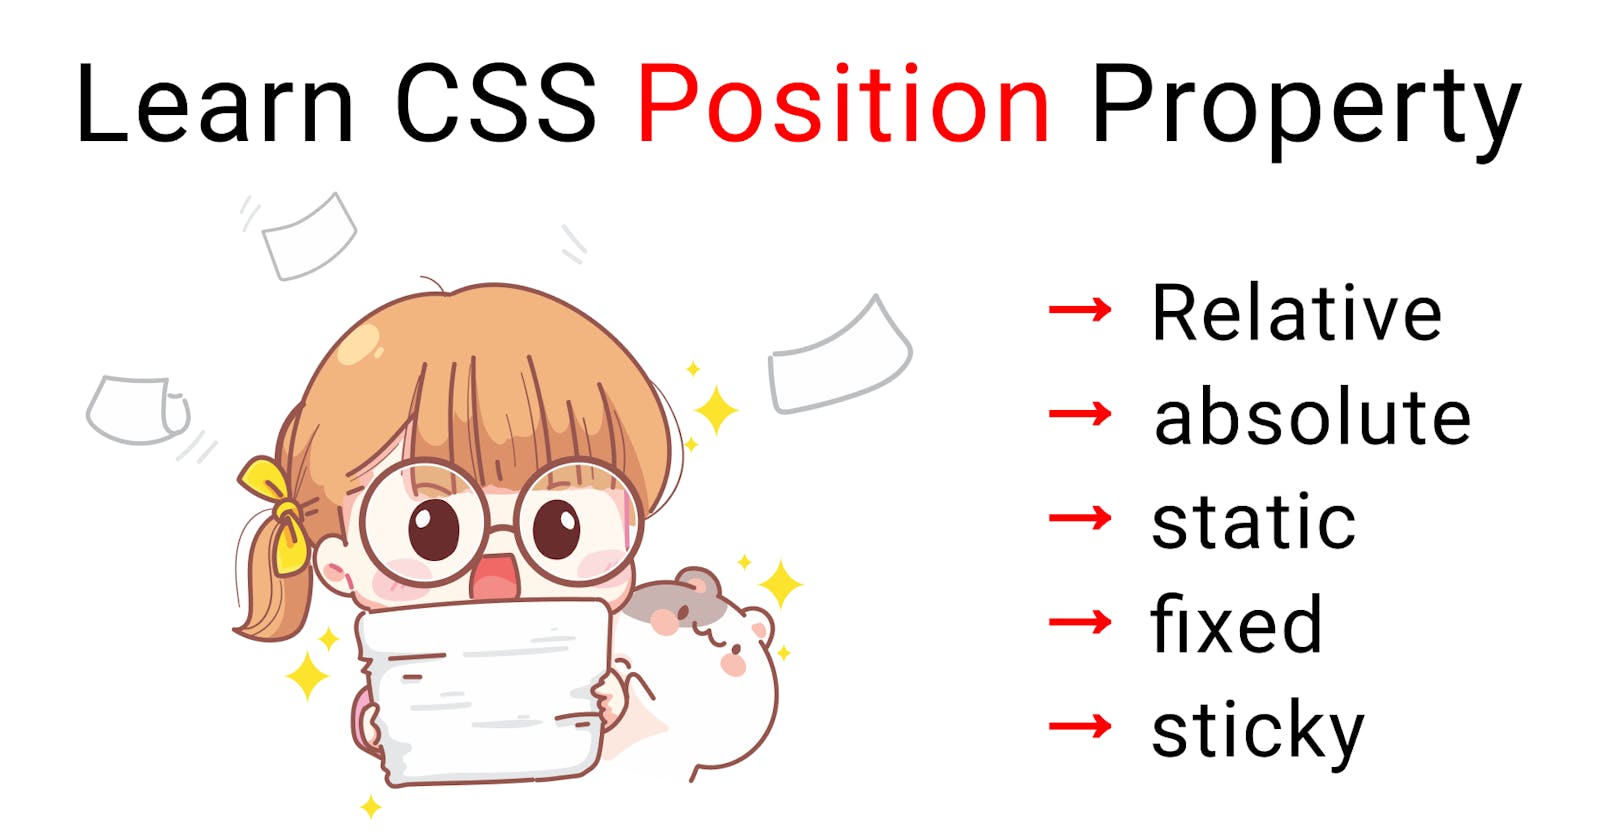 An in-depth guide on the CSS position property